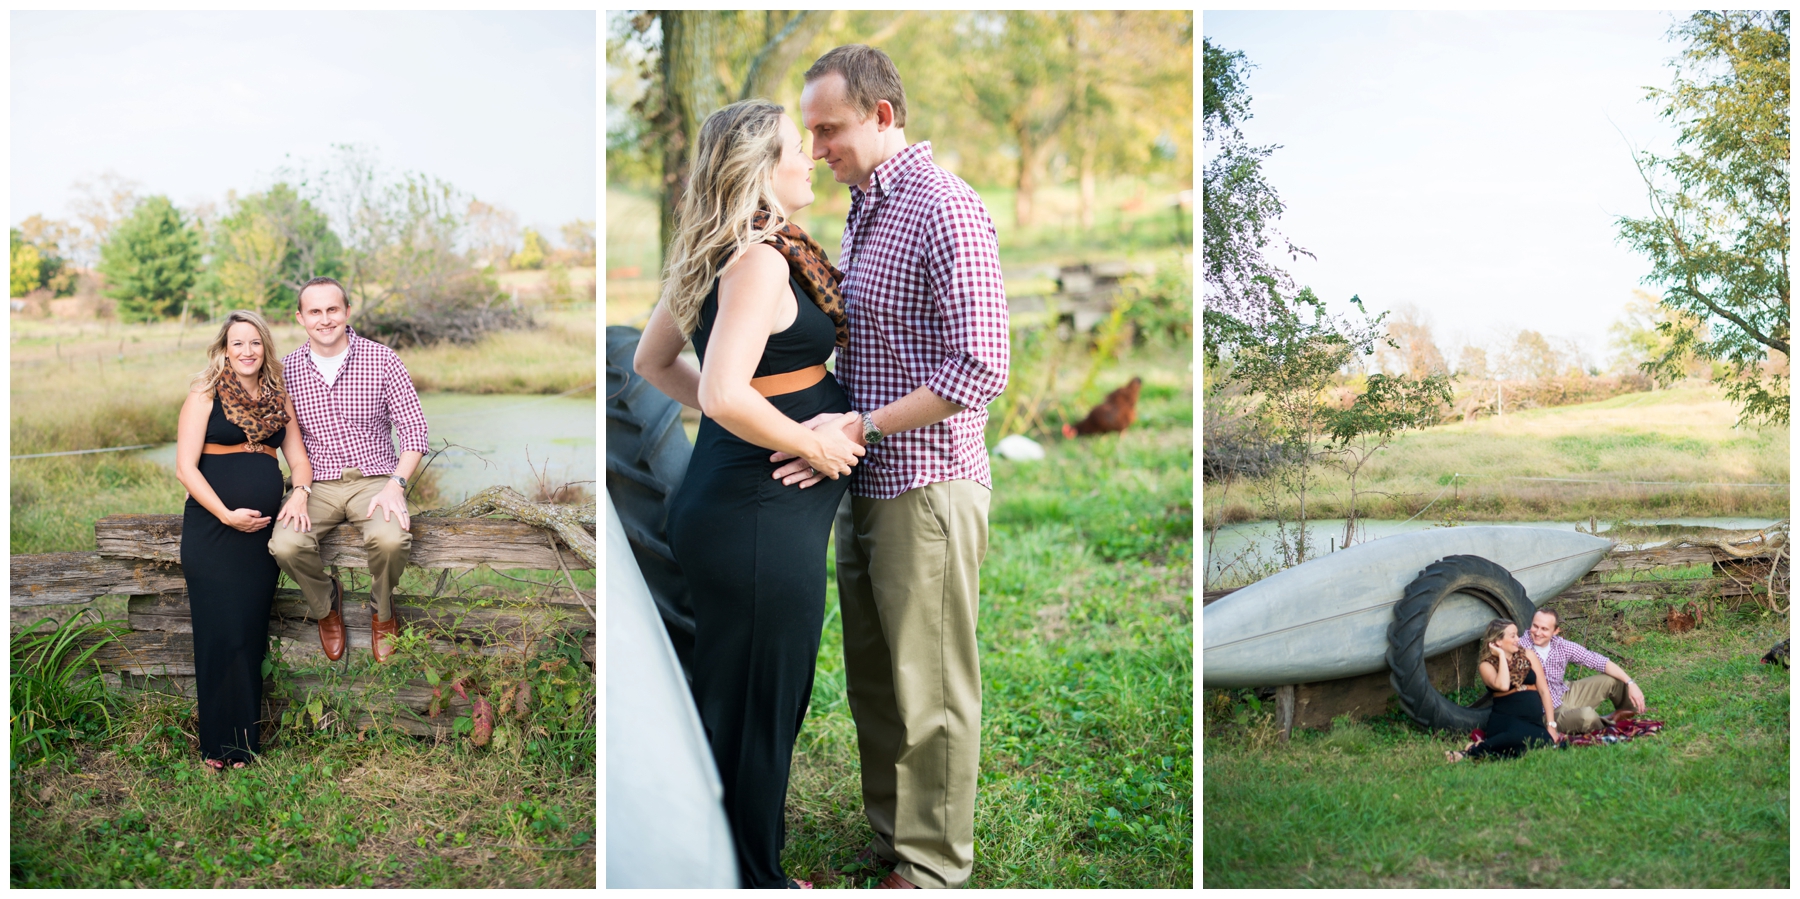 natural-fall-maternity-pictures-wheat-fields-and-vines-kansas-city-family-photographer_0011